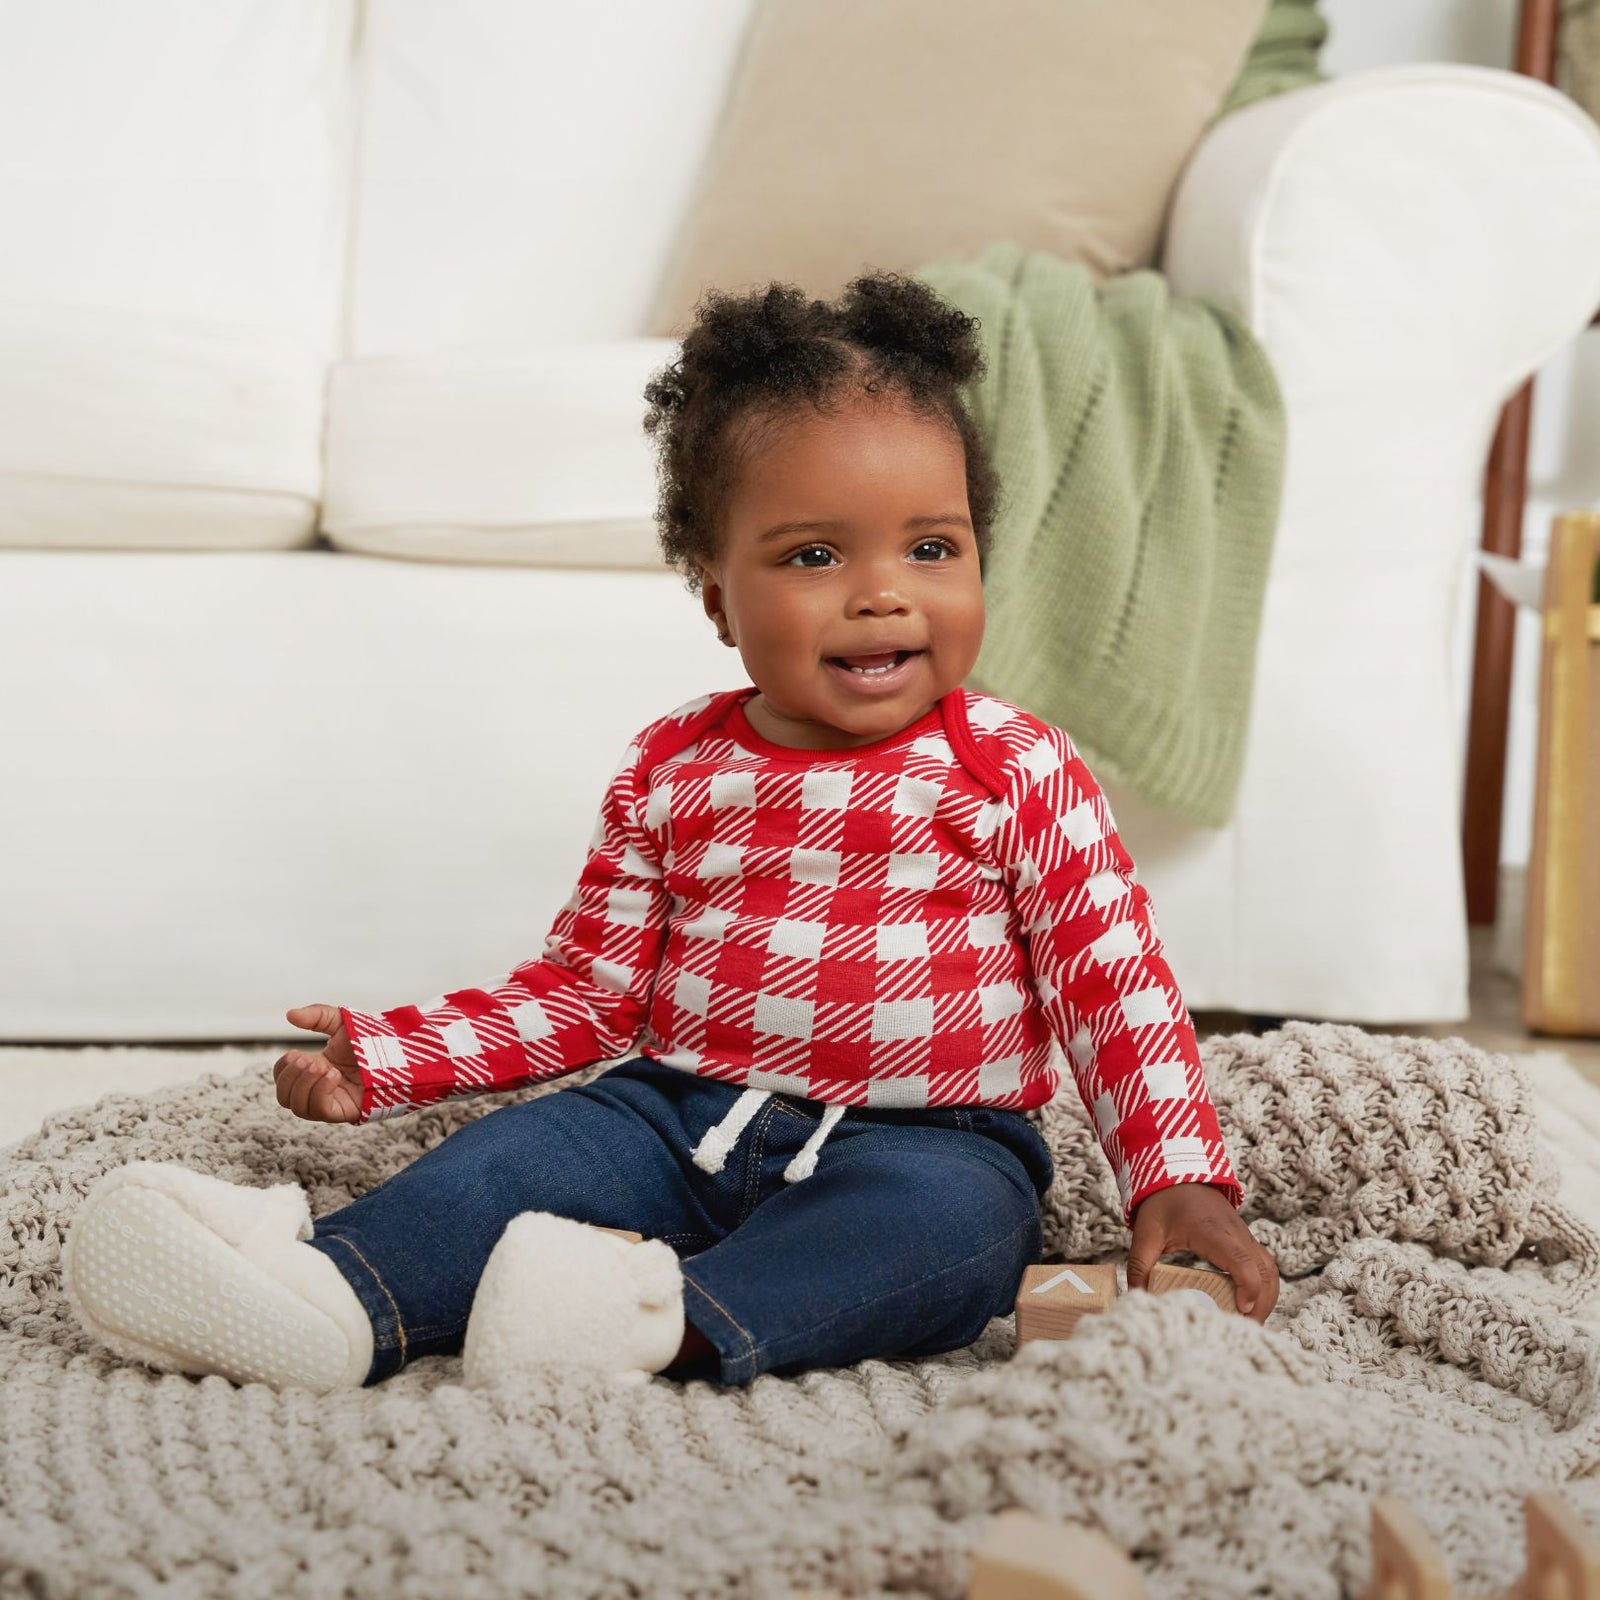  A young African American child sits on a rug wearing a red and white plaid shirt.